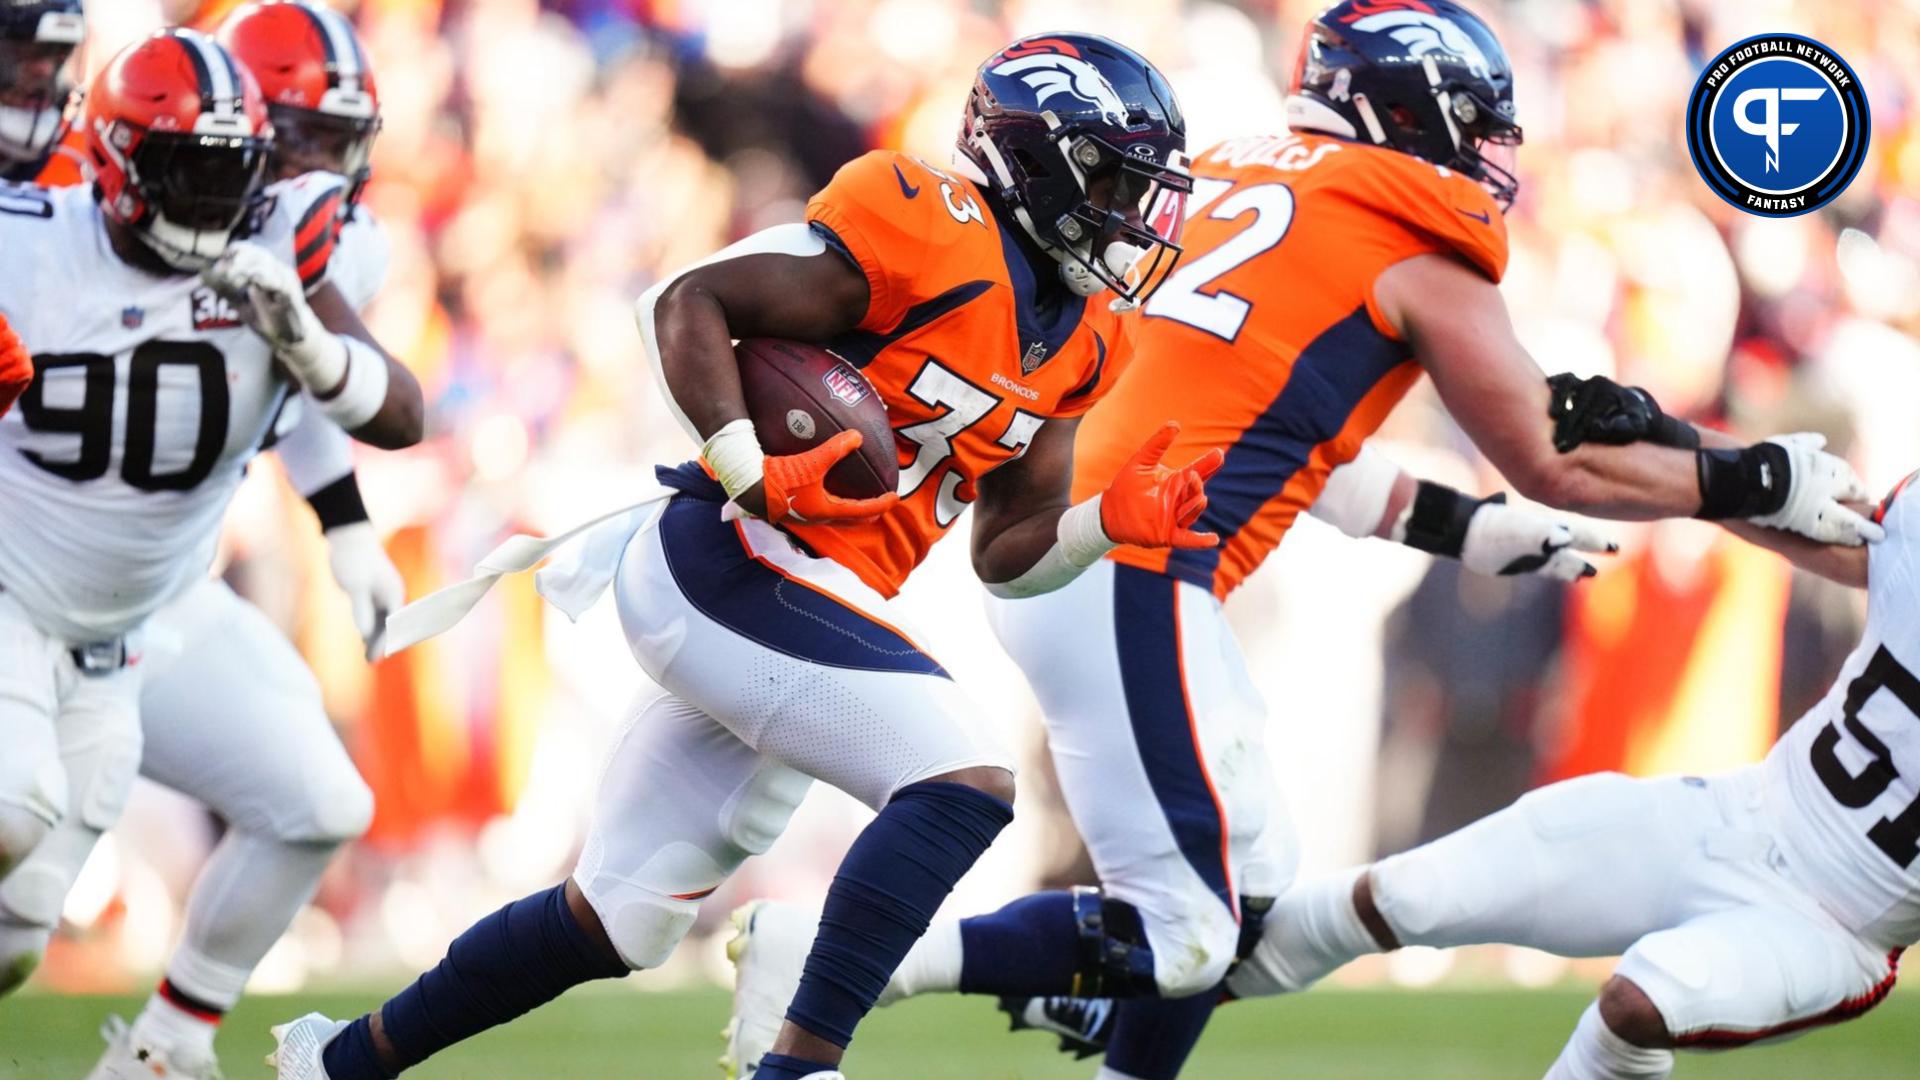 Javonte Williams (33) carries the ball in the second quarter against the Cleveland Browns at Empower Field at Mile High.